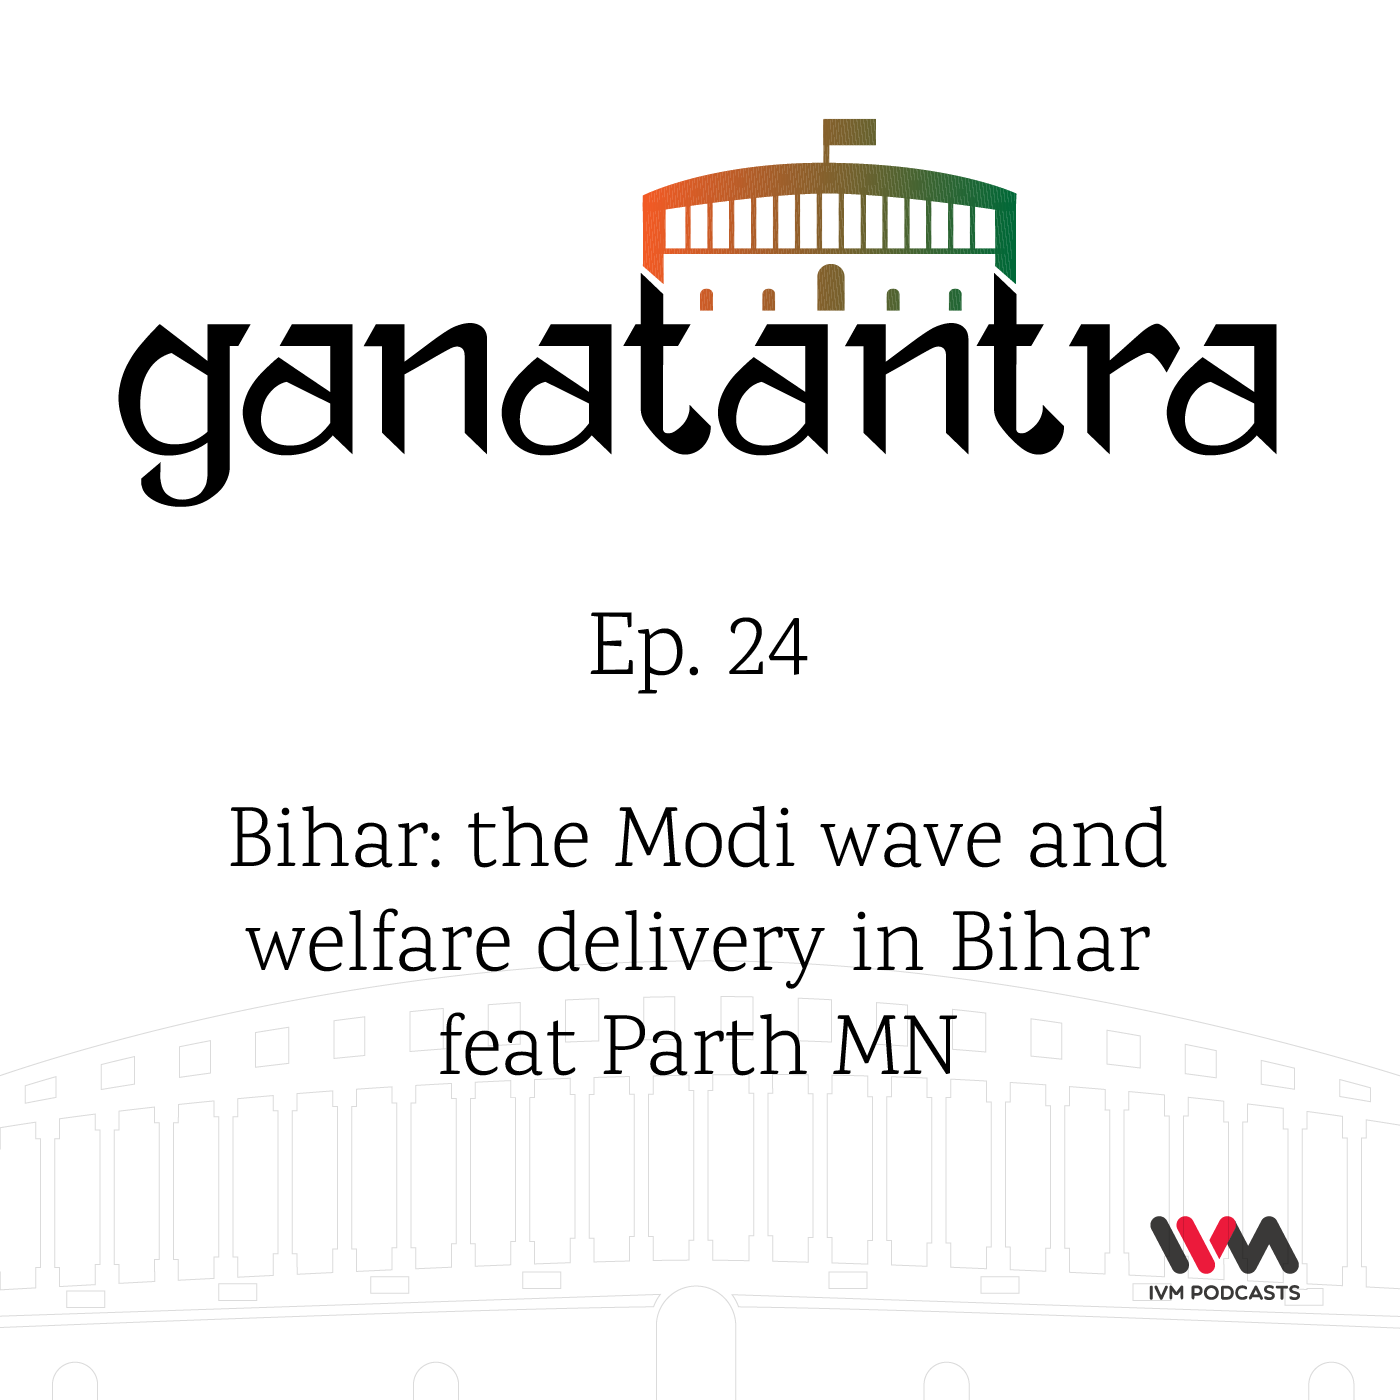 Ep. 24: Bihar: the Modi wave and welfare delivery in bihar feat. Parth MN